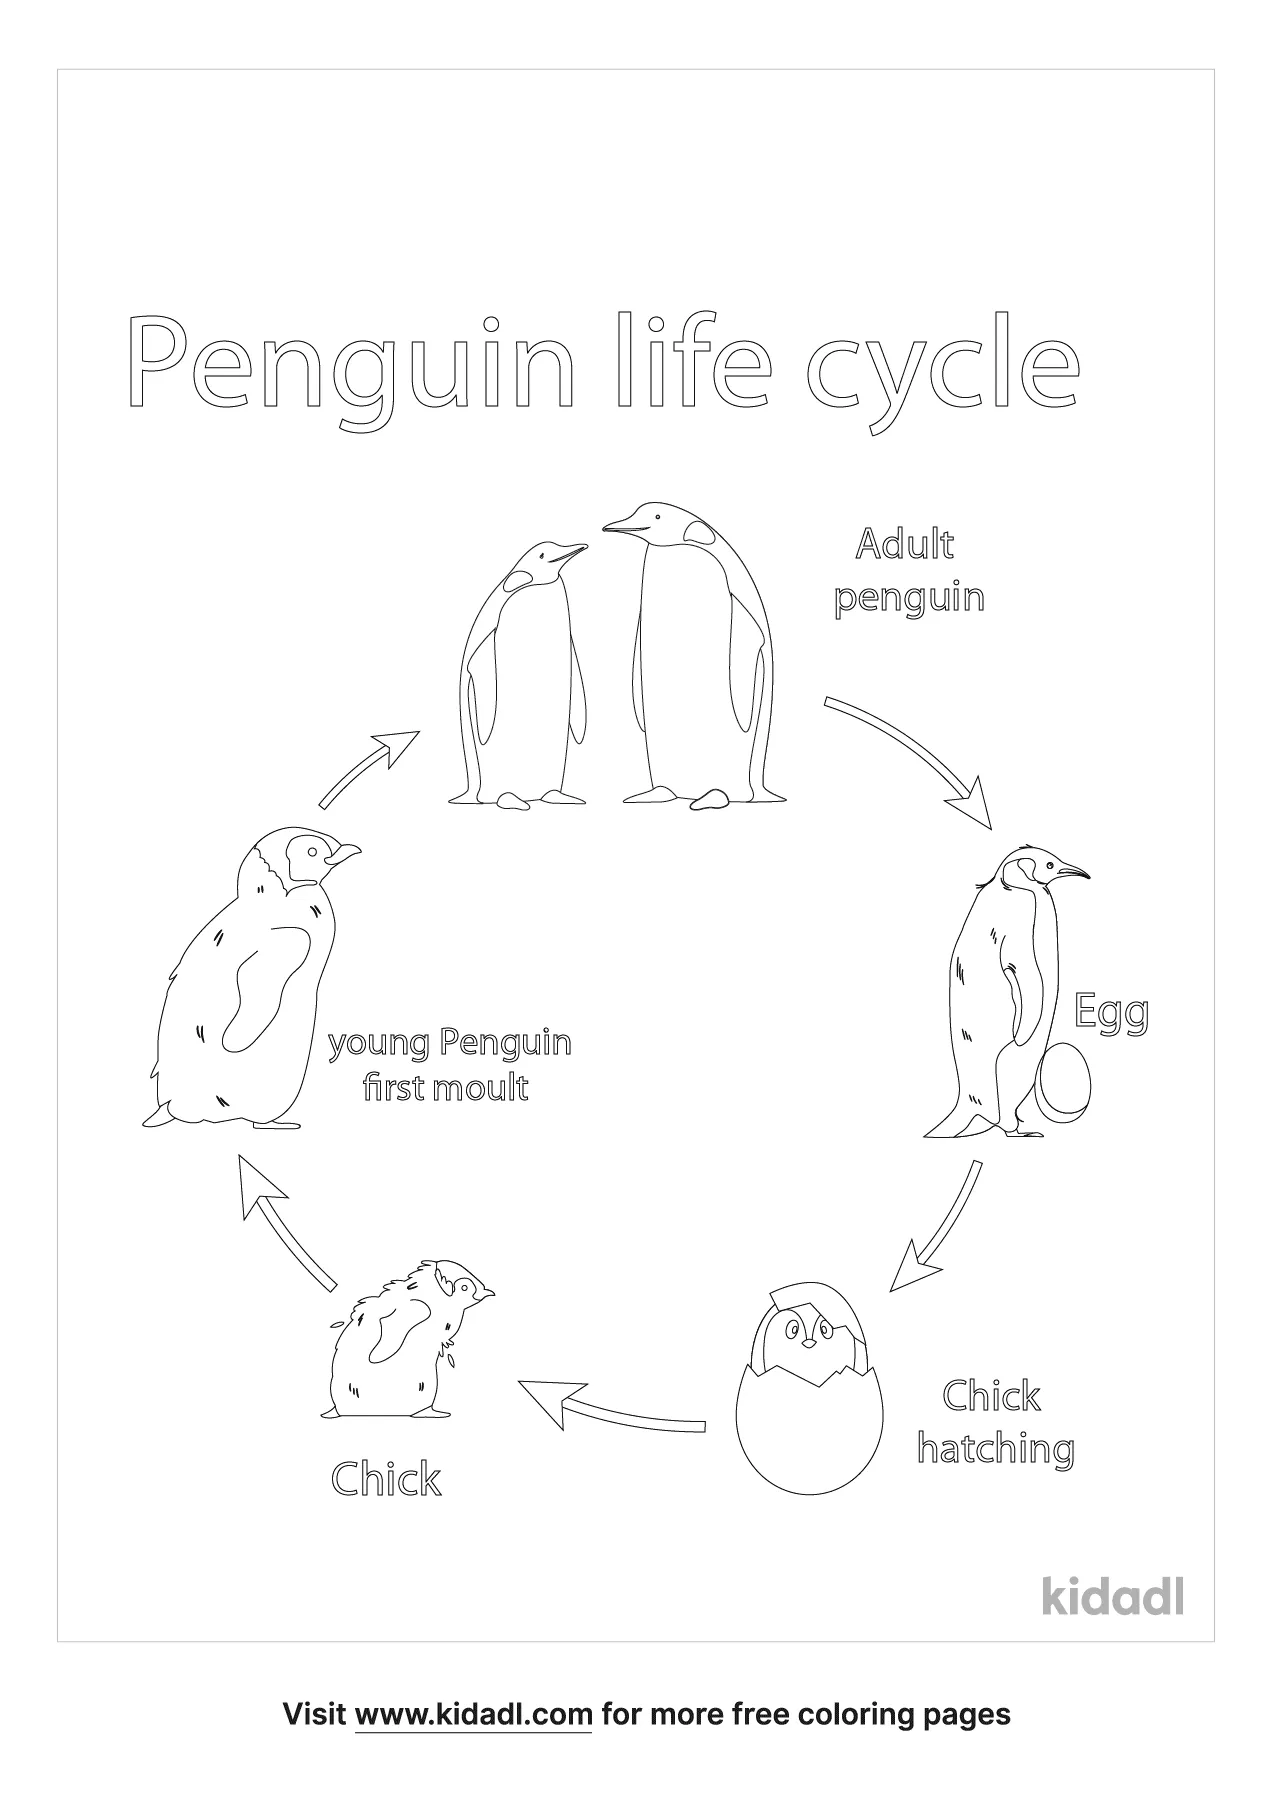 Free penguin life cycle coloring page coloring page printables